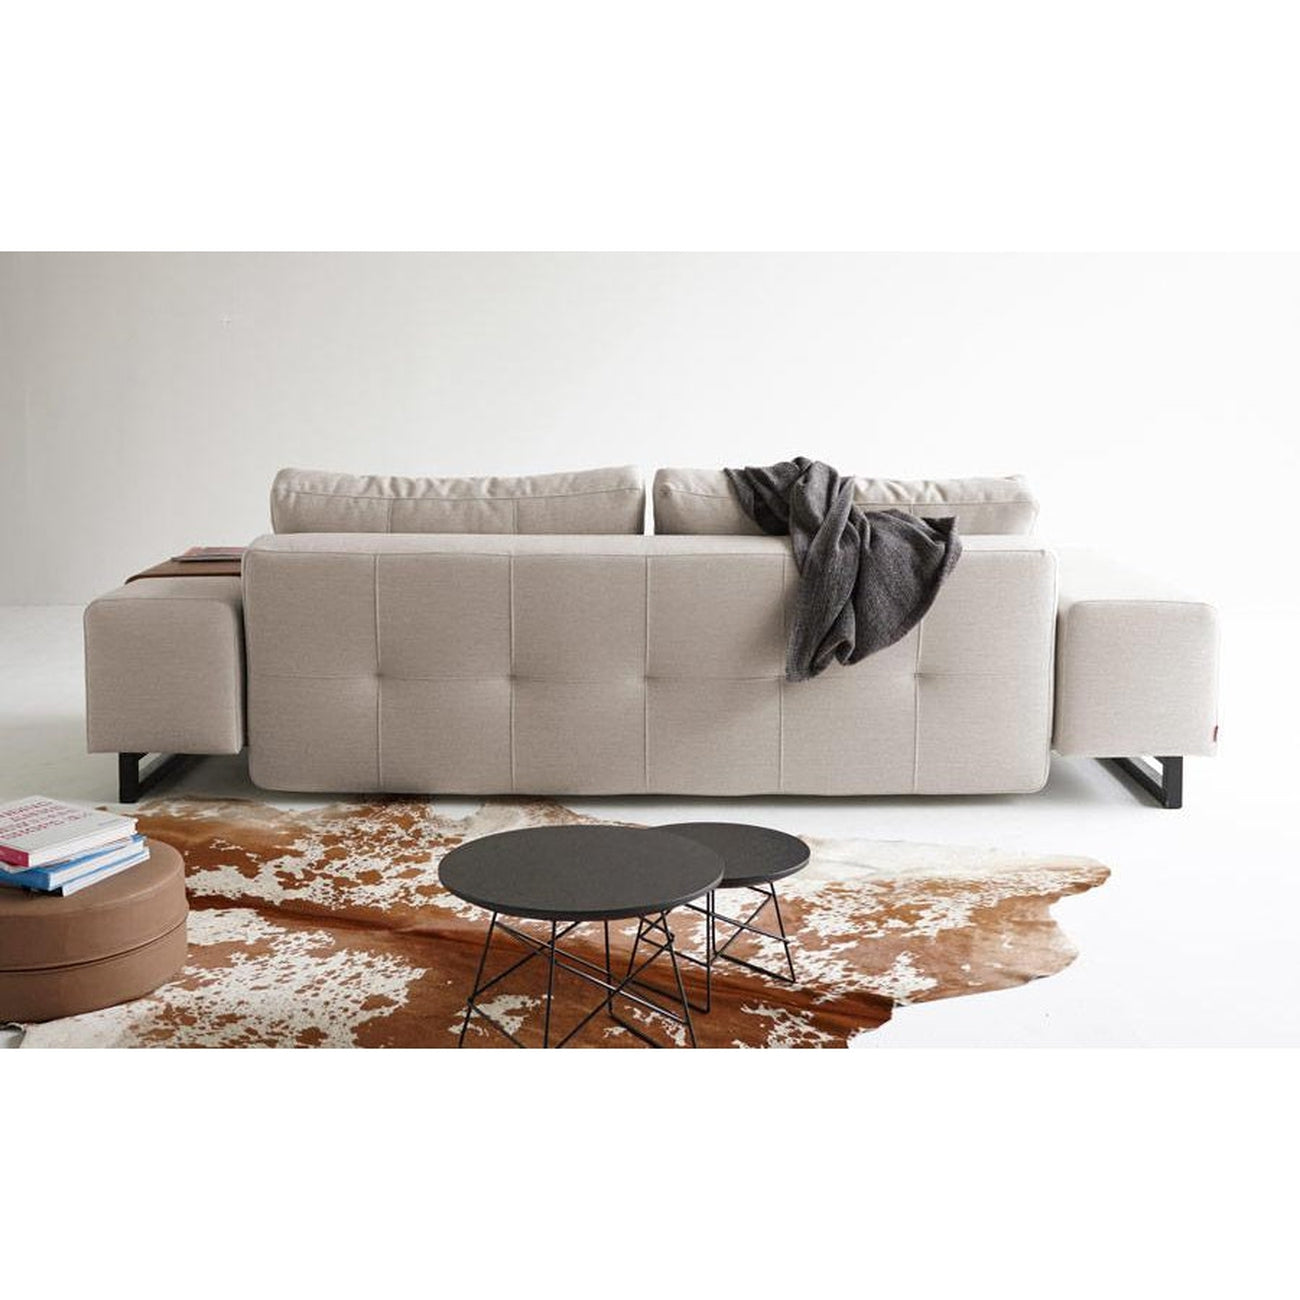 Grand D.E.L sofa BLACK WOOD (QUEEN)-Innovation Living-INNO-94-748190527-3-SofasMixed Dance Natural-9-France and Son